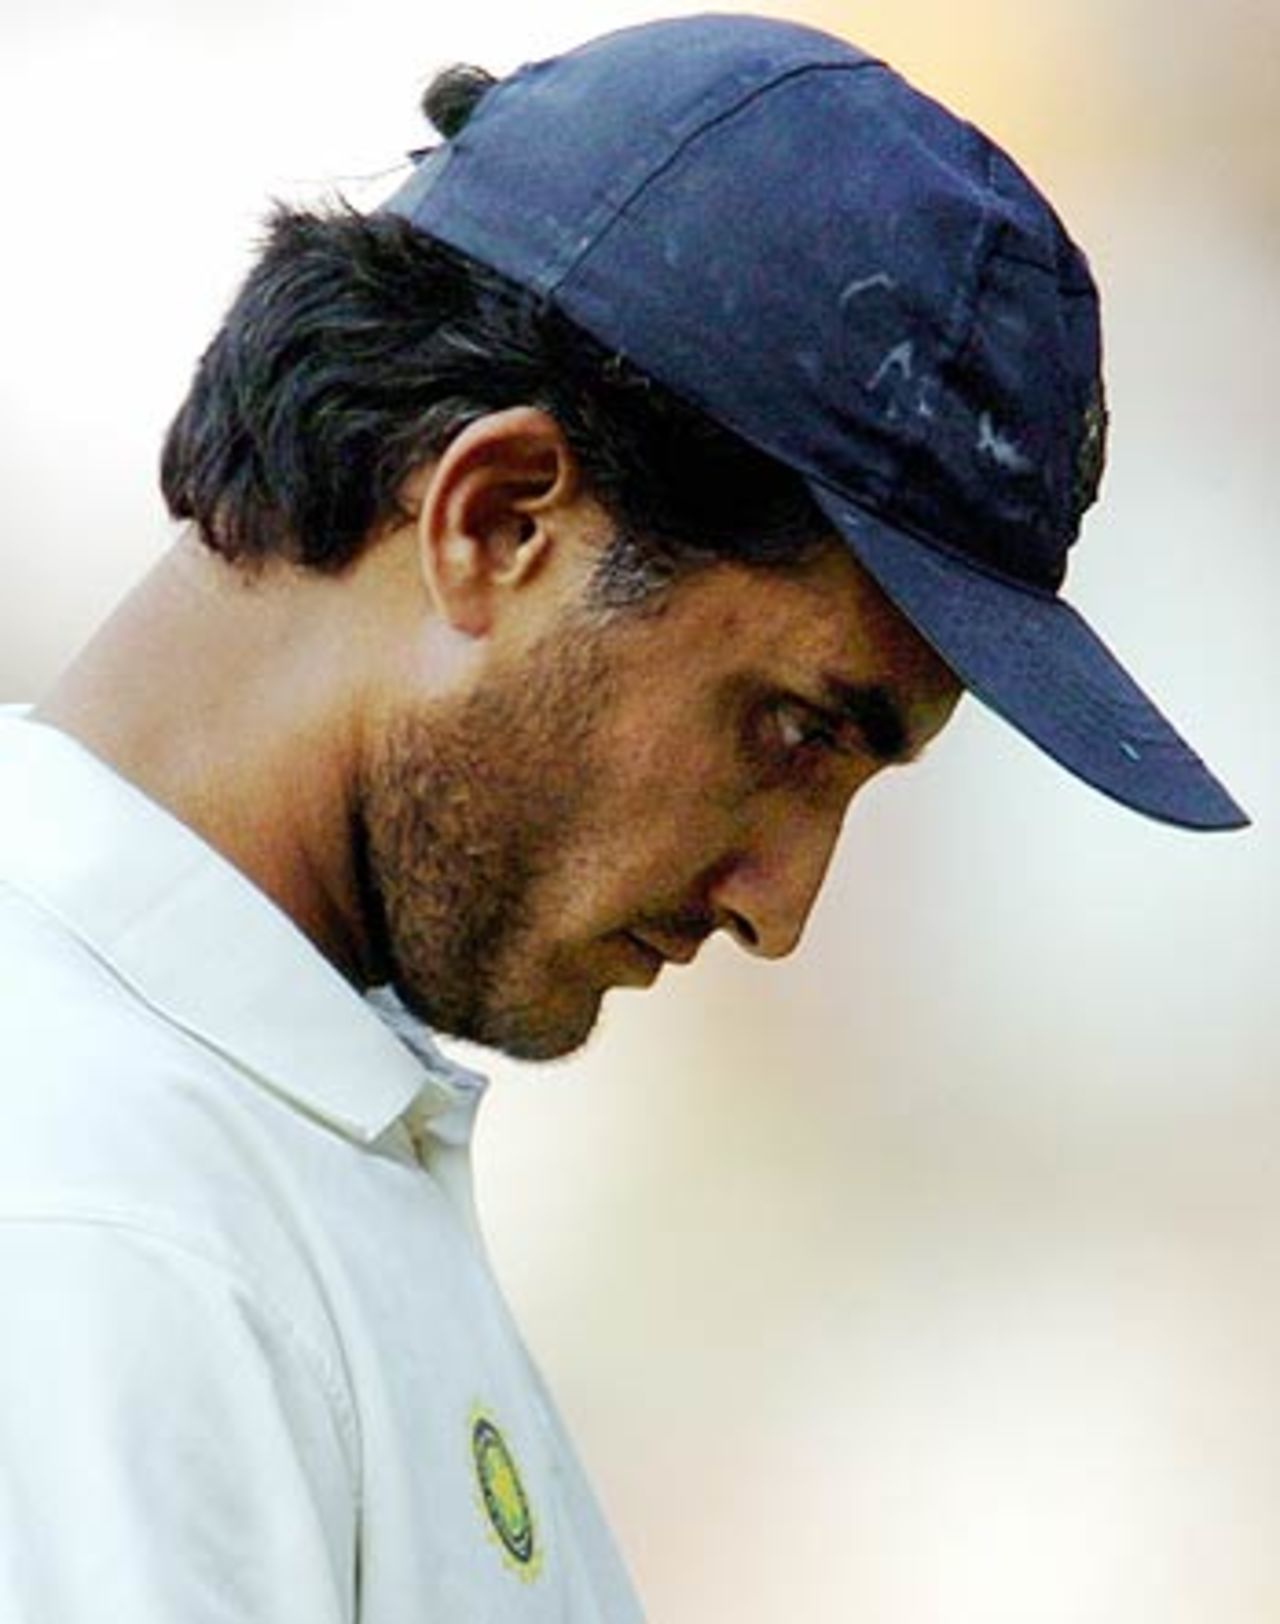 Sourav Ganguly was helpless in the face of Pakistan's assault, India v Pakistan, 3rd Test, Bangalore, 4th day, March 27, 2005